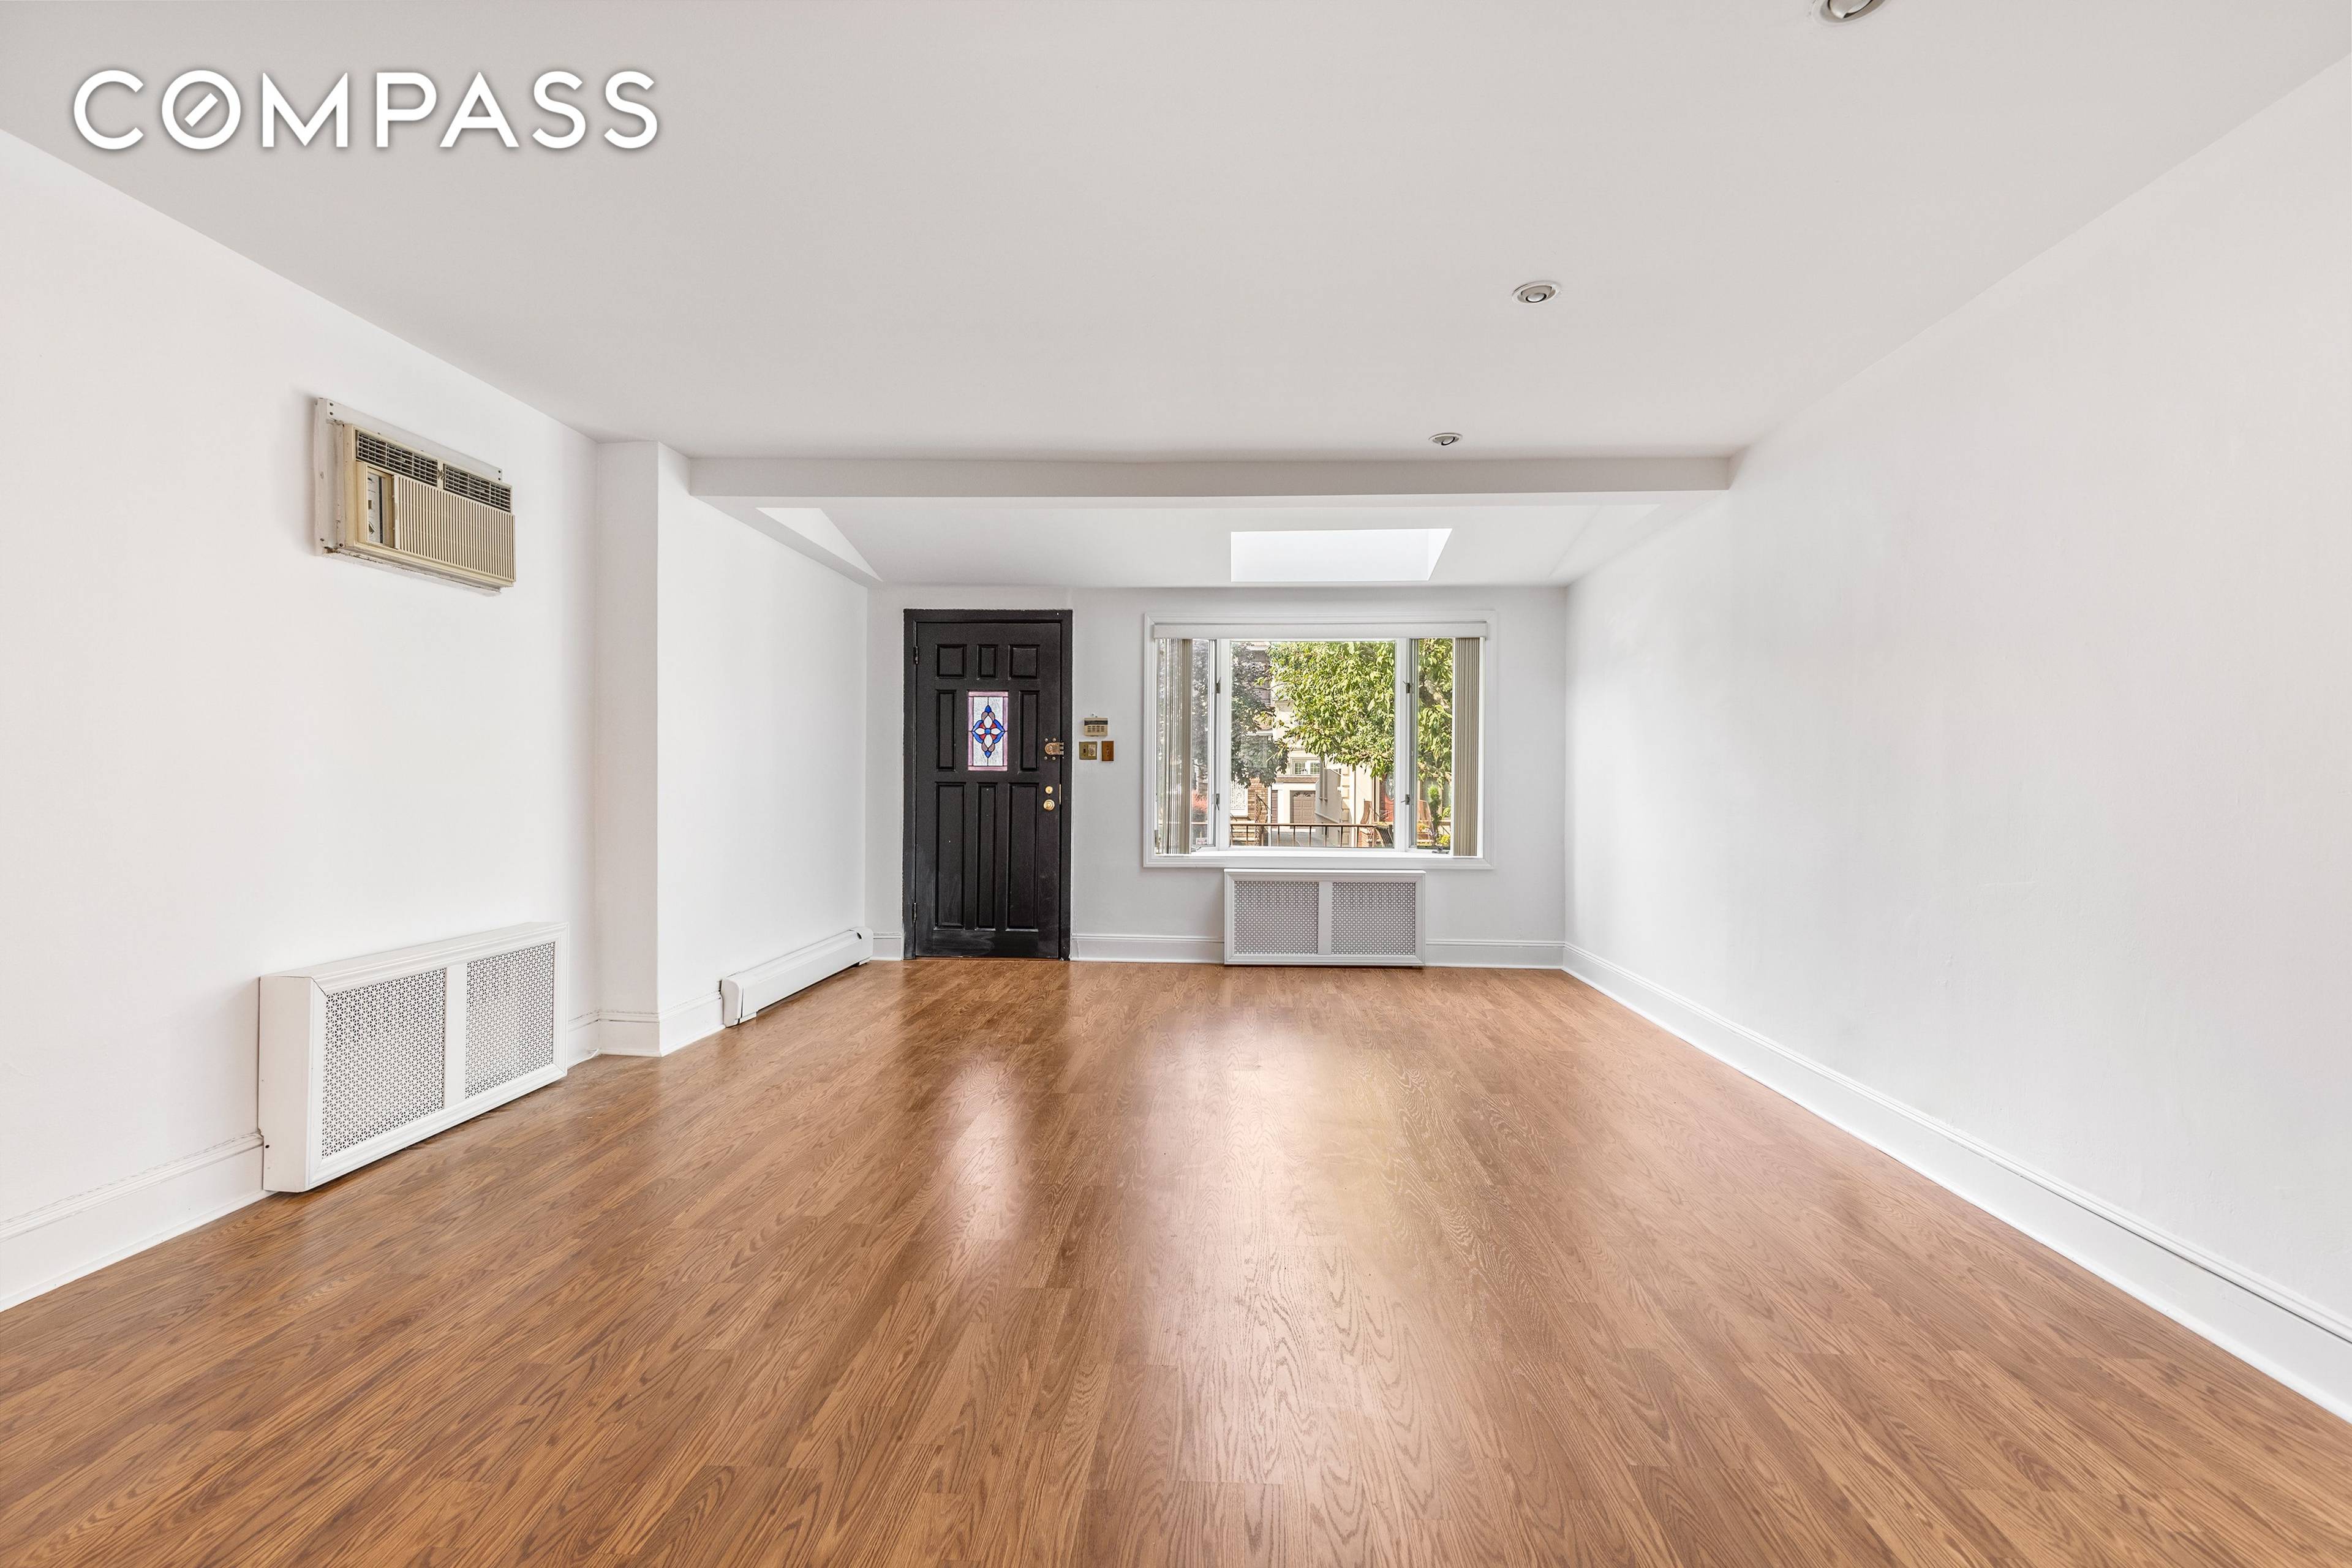 Welcome to 1037 81st Street, a well maintained two family home nestled in the desirable neighborhood of Dyker Heights, Brooklyn.